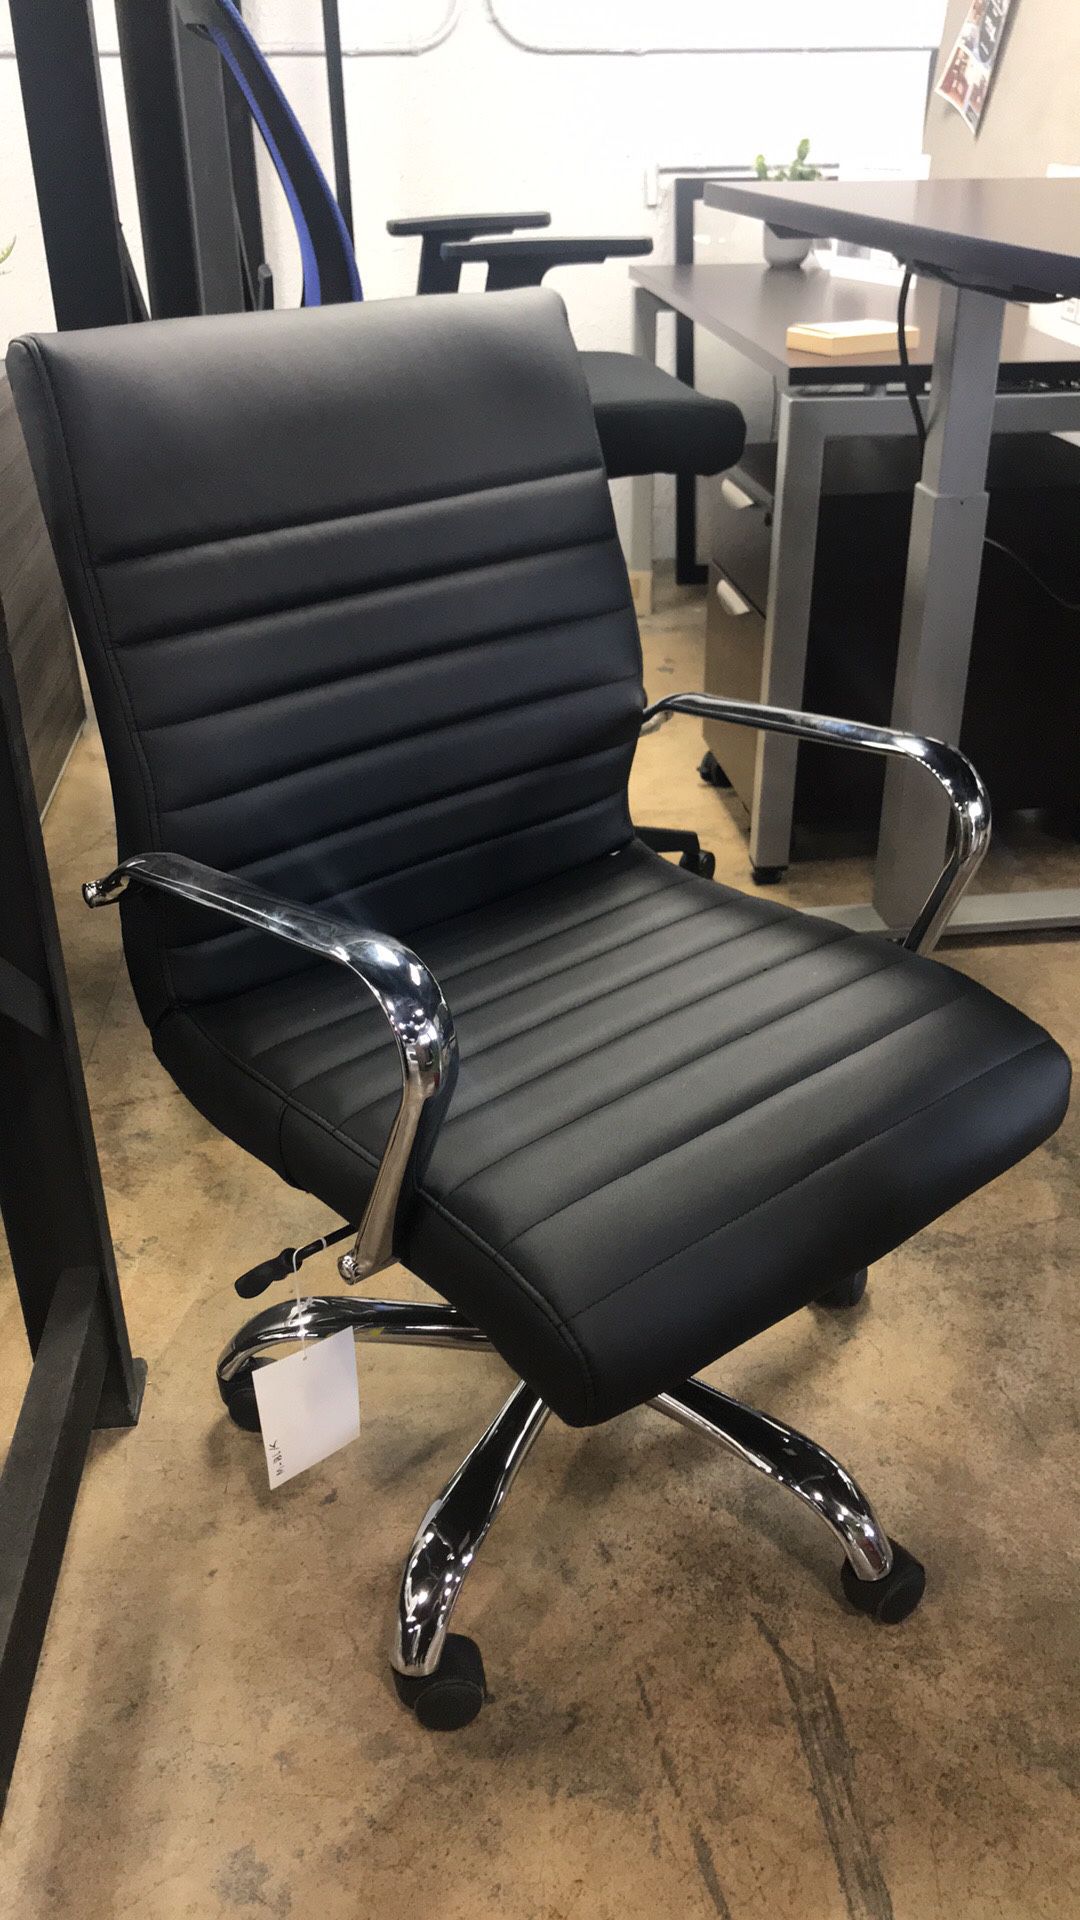 Bonded leather chairs